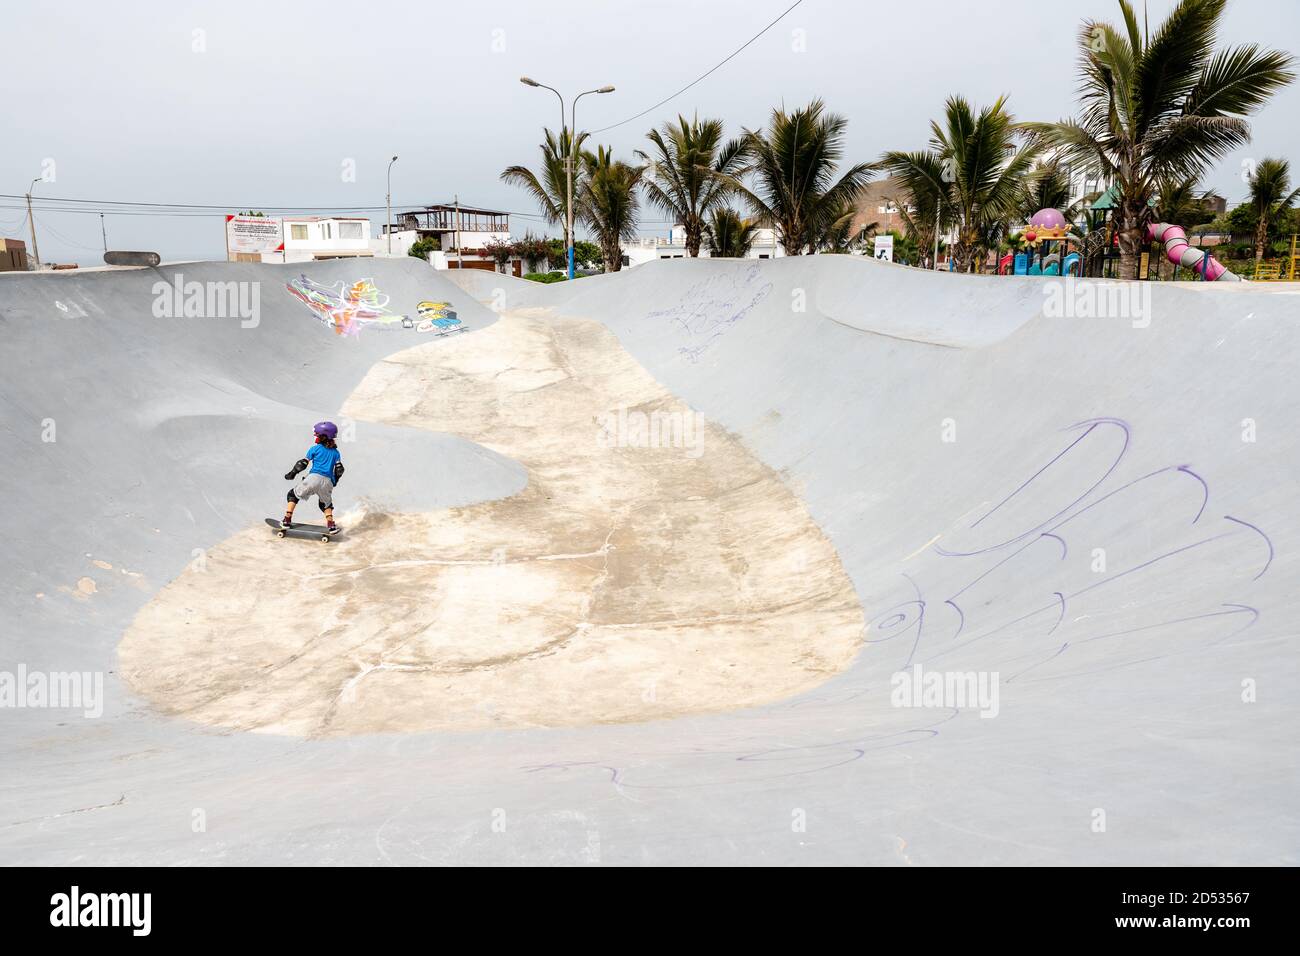 A young boy wearing trendy clothes, a purple helmet, and a face mask, skates in SKATEPARK SAN BARTOLO POZAS BOWLS during the pandemic period. Stock Photo